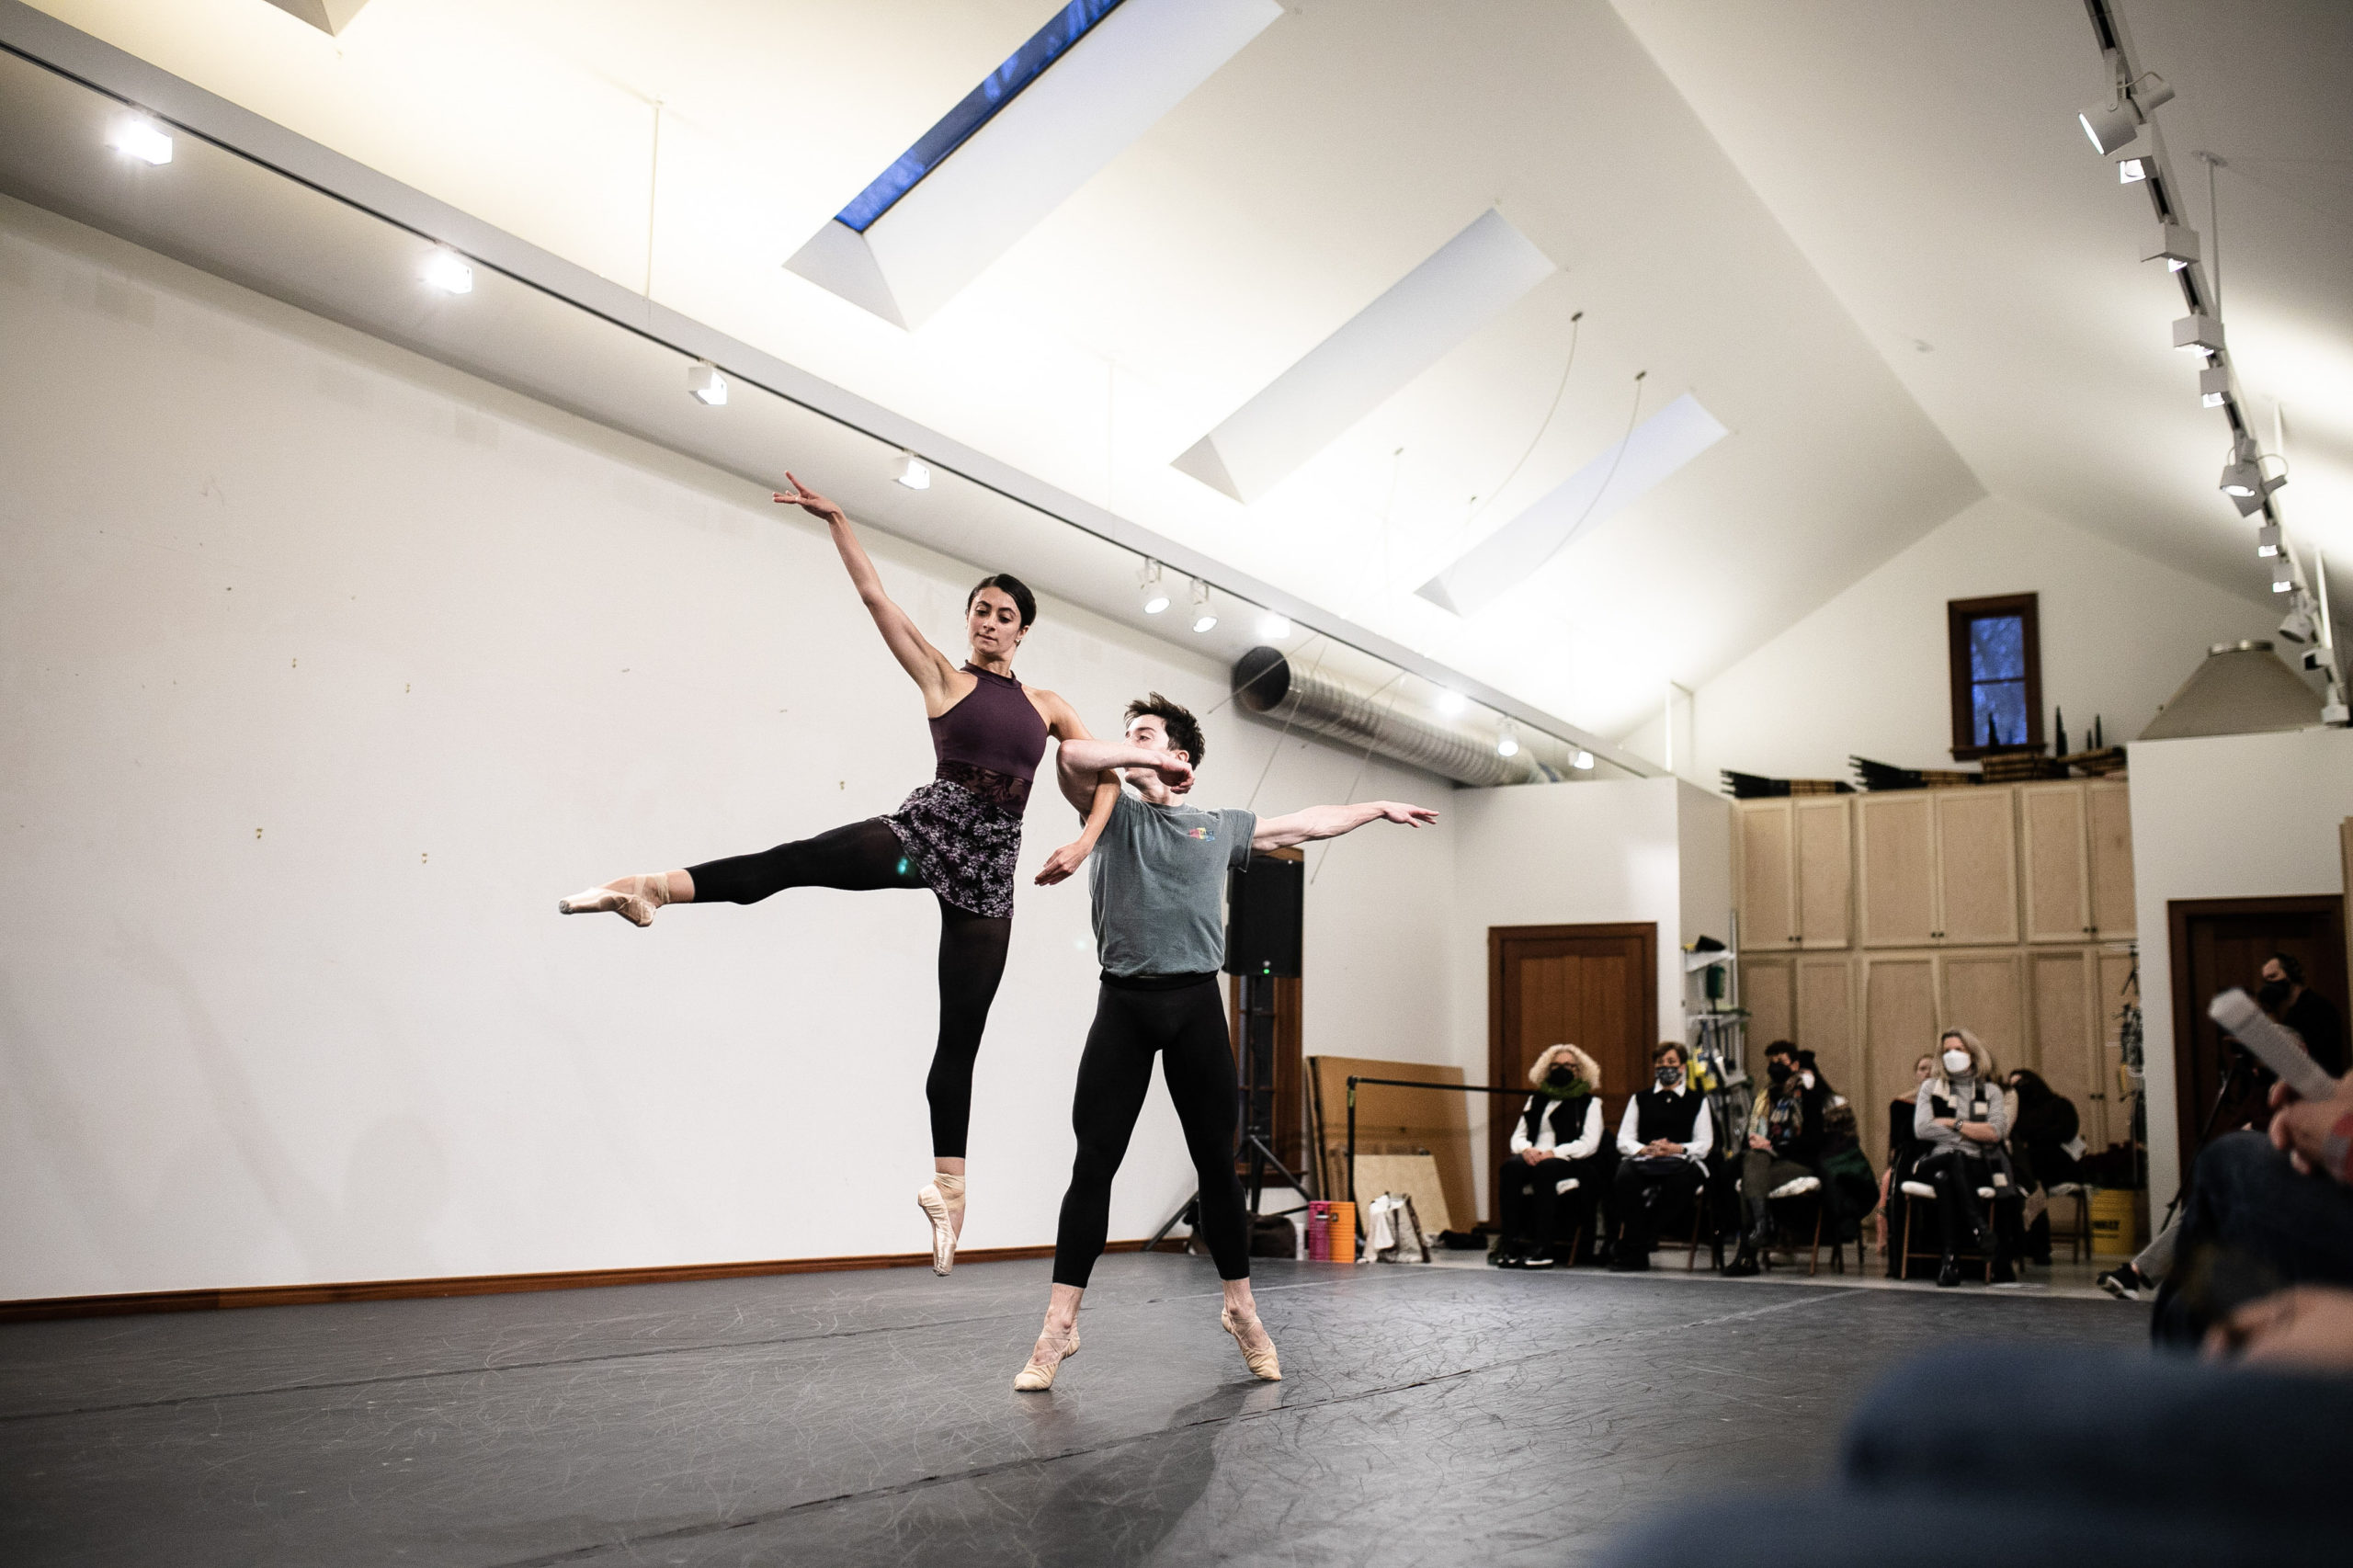 Hamptons Dance Project dancers Lauren Bonfiglio and Tyler Maloney in rehearsal at the Guild Hall William P. Rayner Artist-in-Residence studio. © JOE BRONDO FOR GUILD HALL